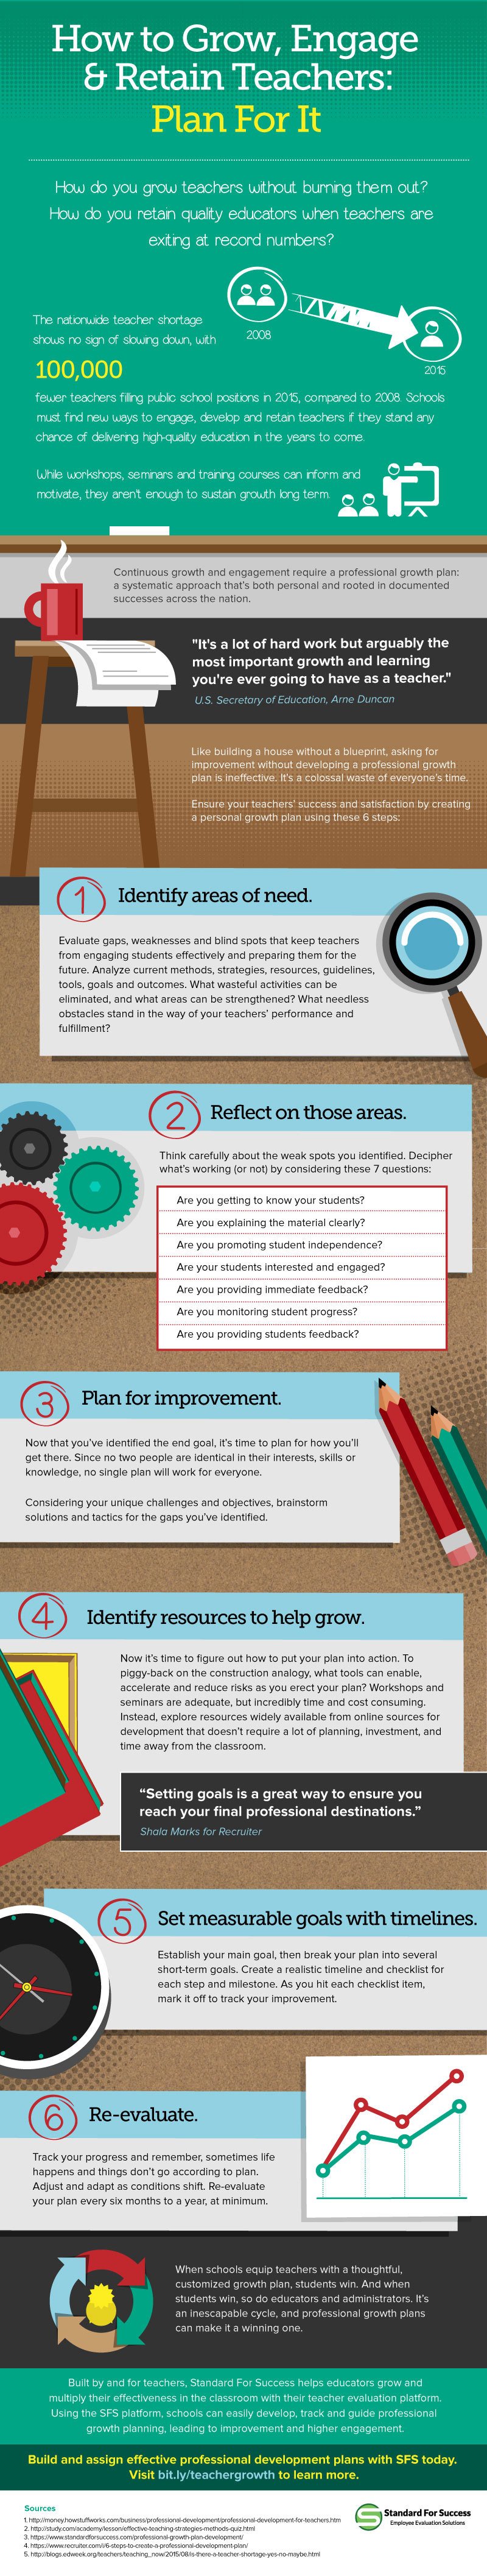 How to Grow, Engage and Retain Teachers Infographic